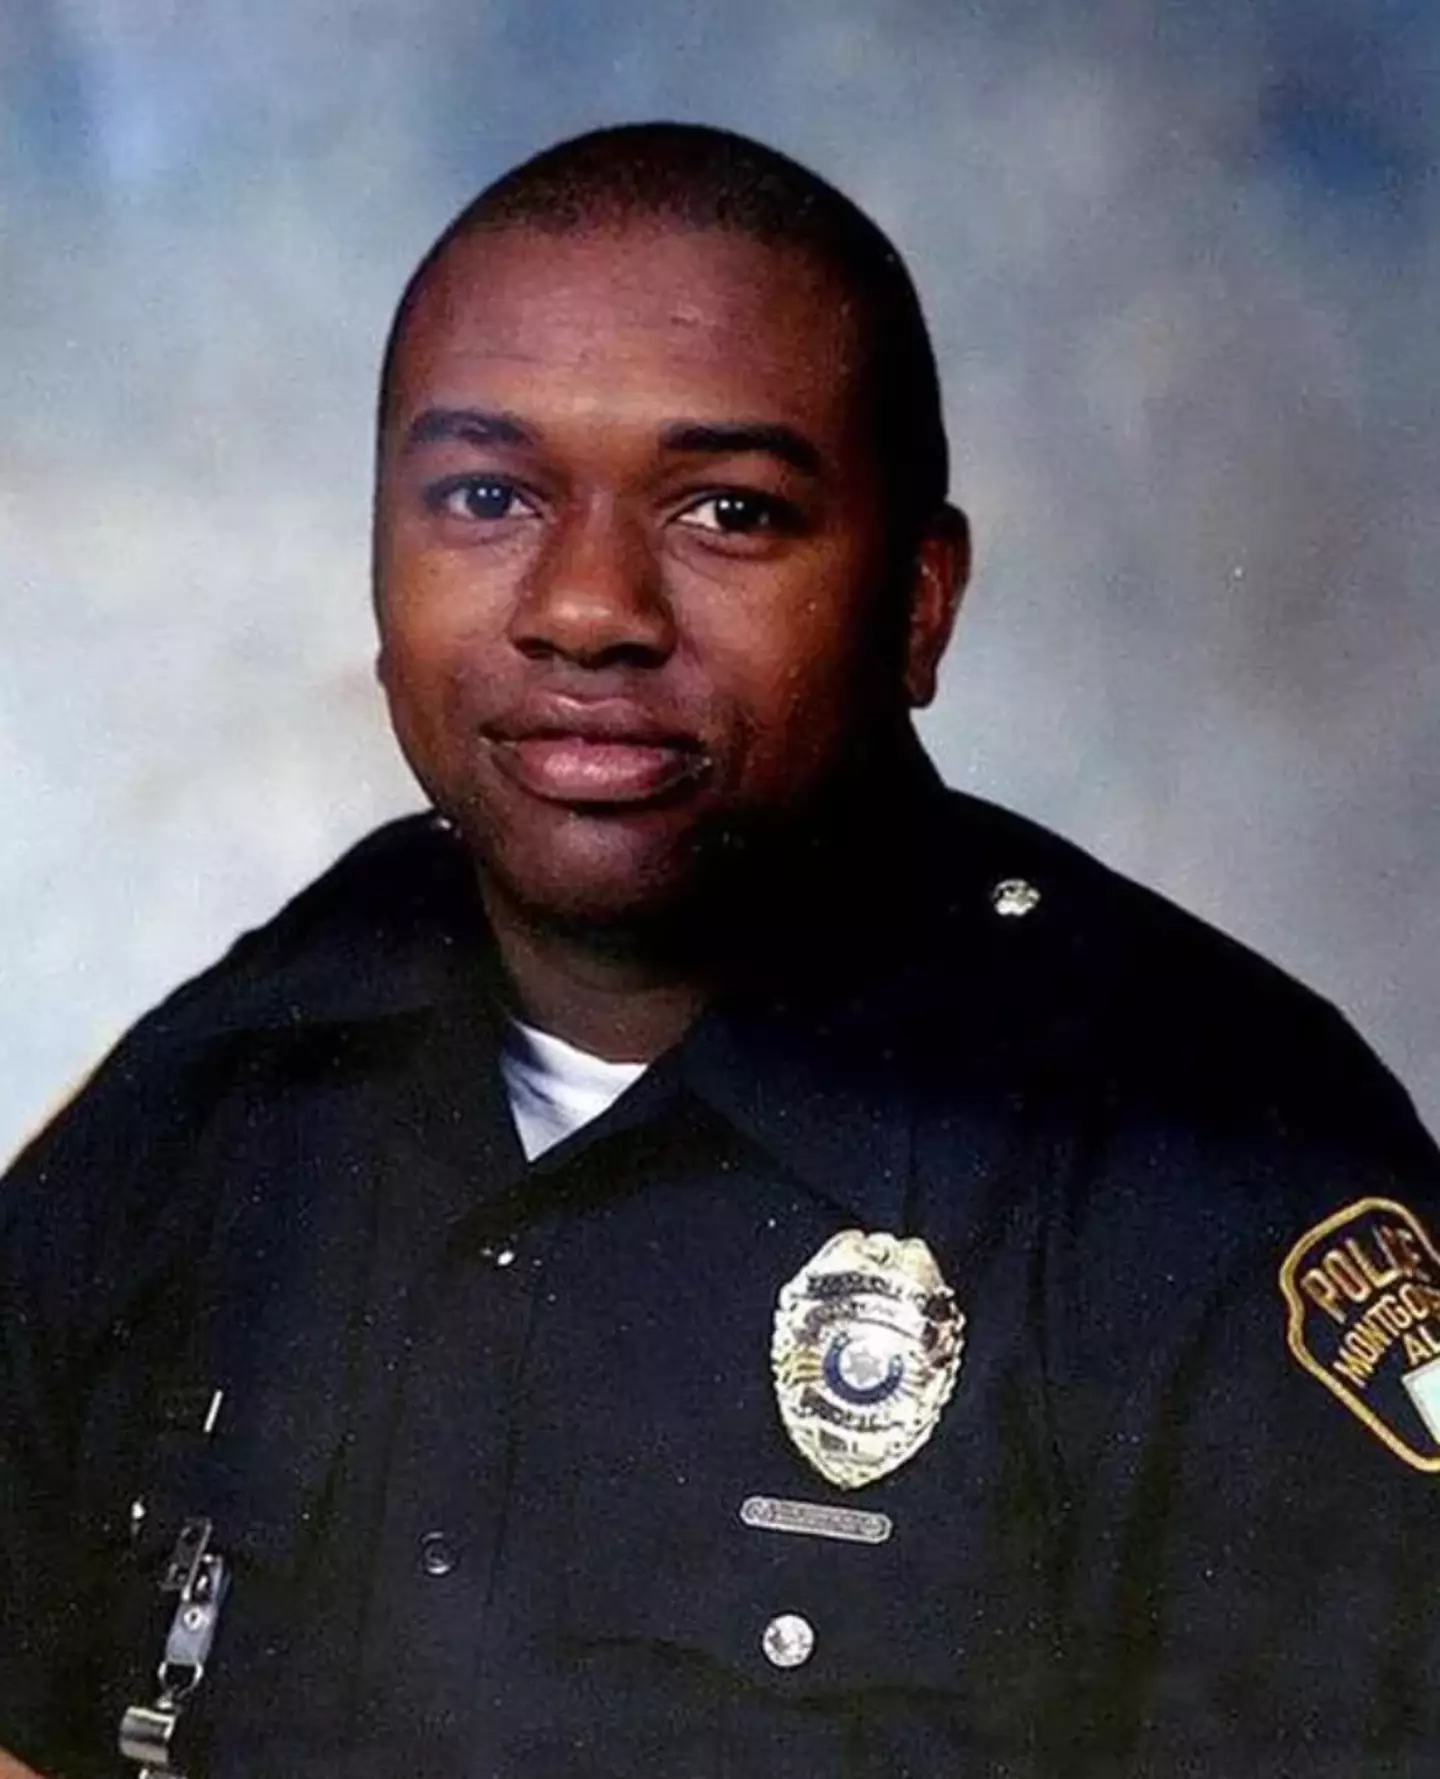 Montgomery Police Officer Anderson Gordon was killed by McNabb.